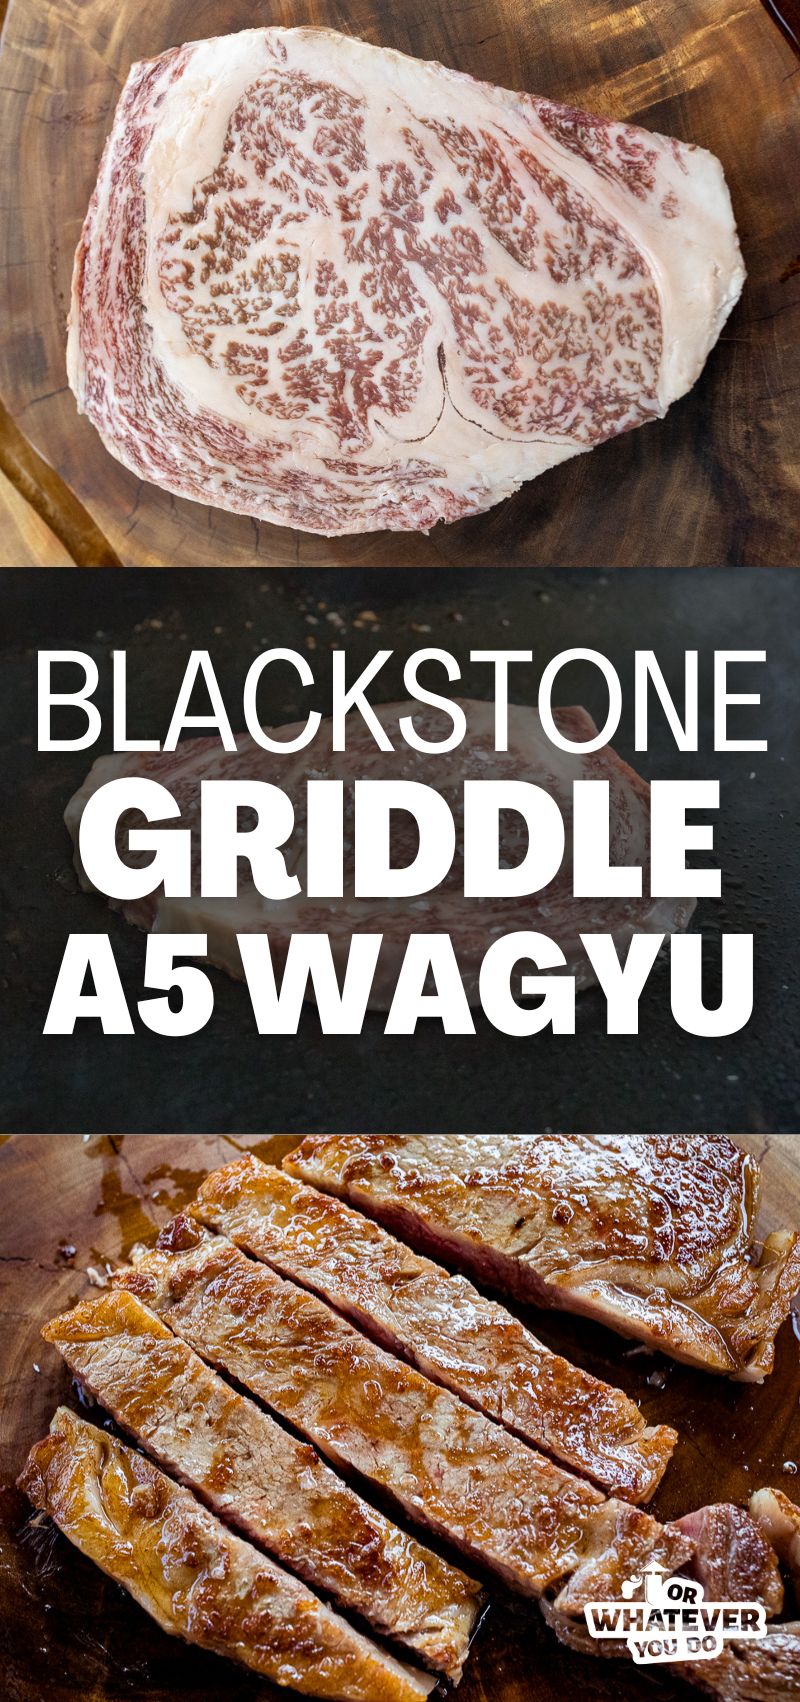 How to cook A5 on the Blackstone